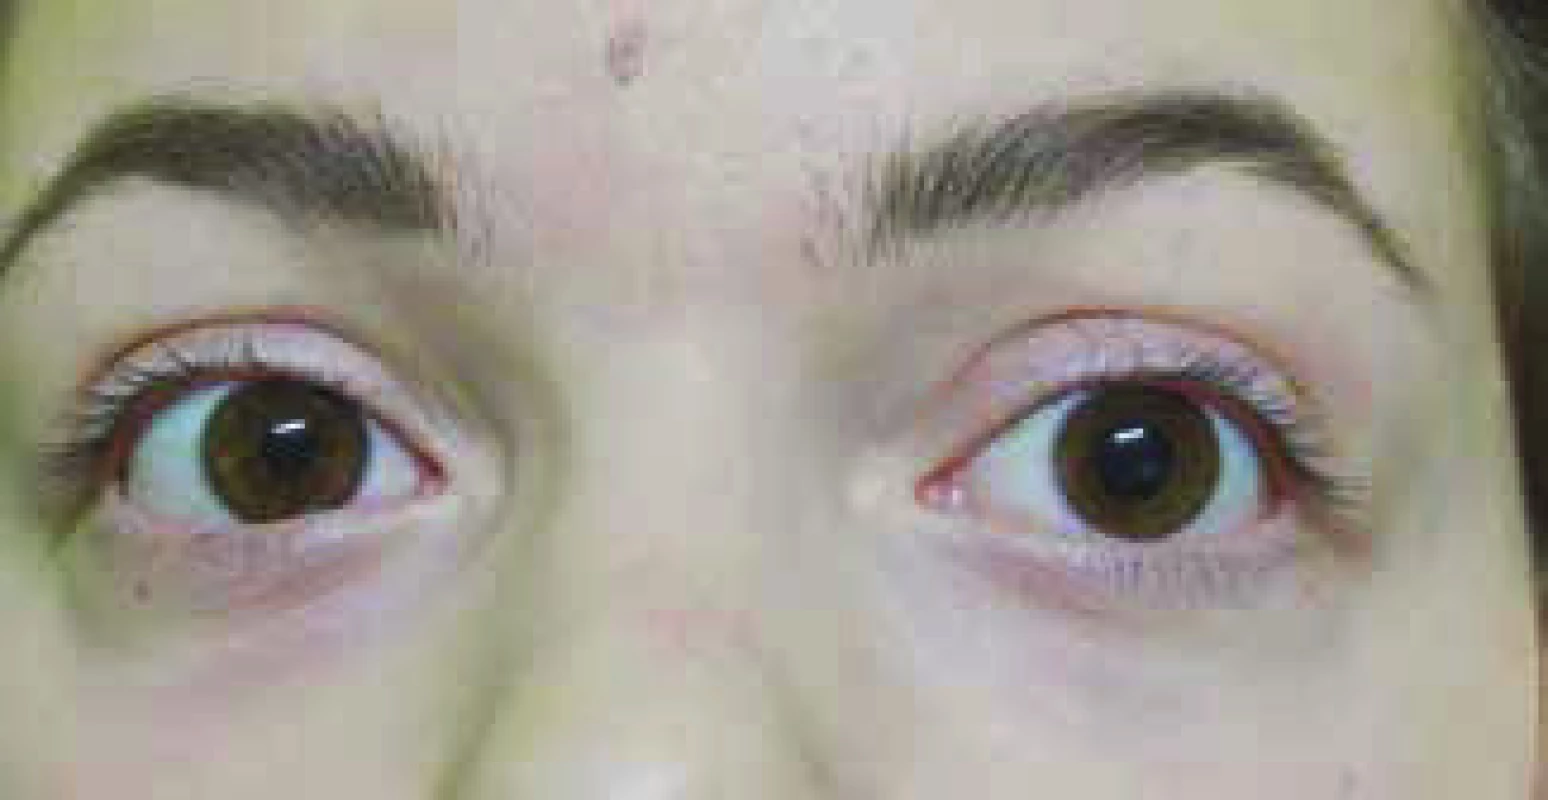 Anisocoria upon dilation of pupil of left eye in a
16-year-old patient